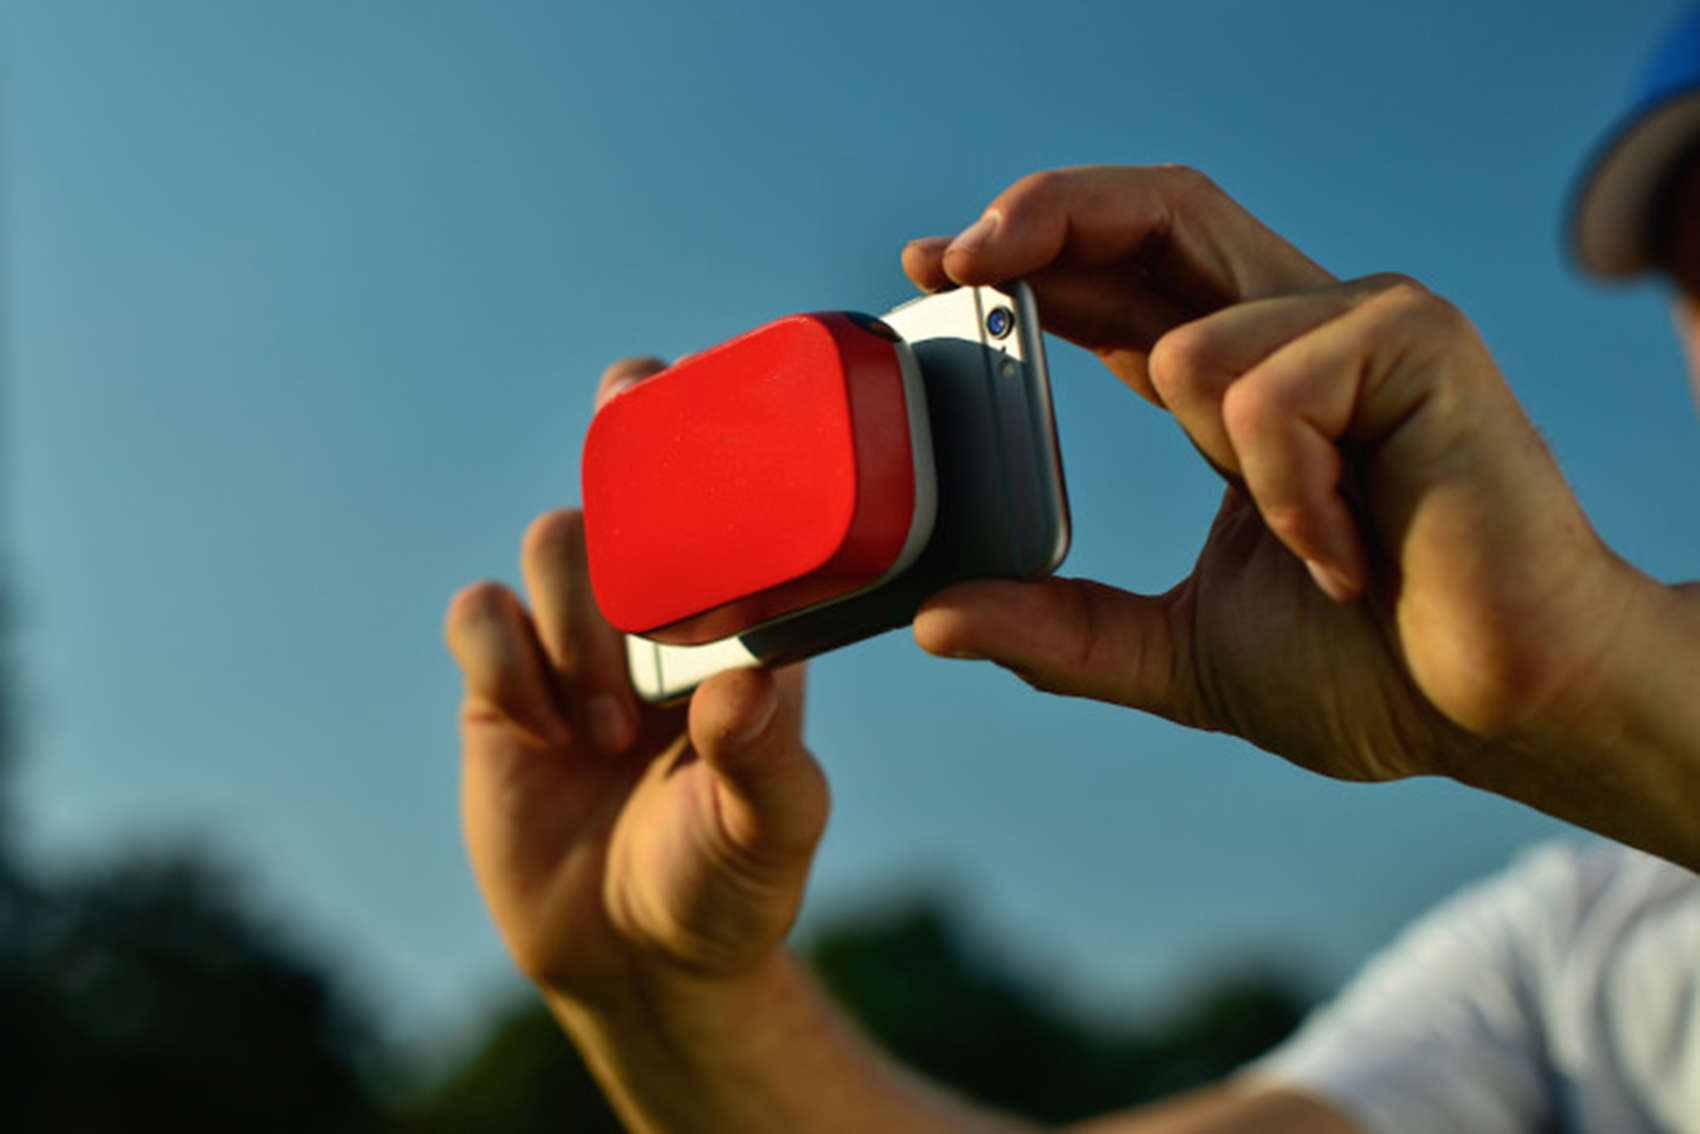 The Scoutee can attach to an iPhone and record pitch speeds and other data it sends to an app.